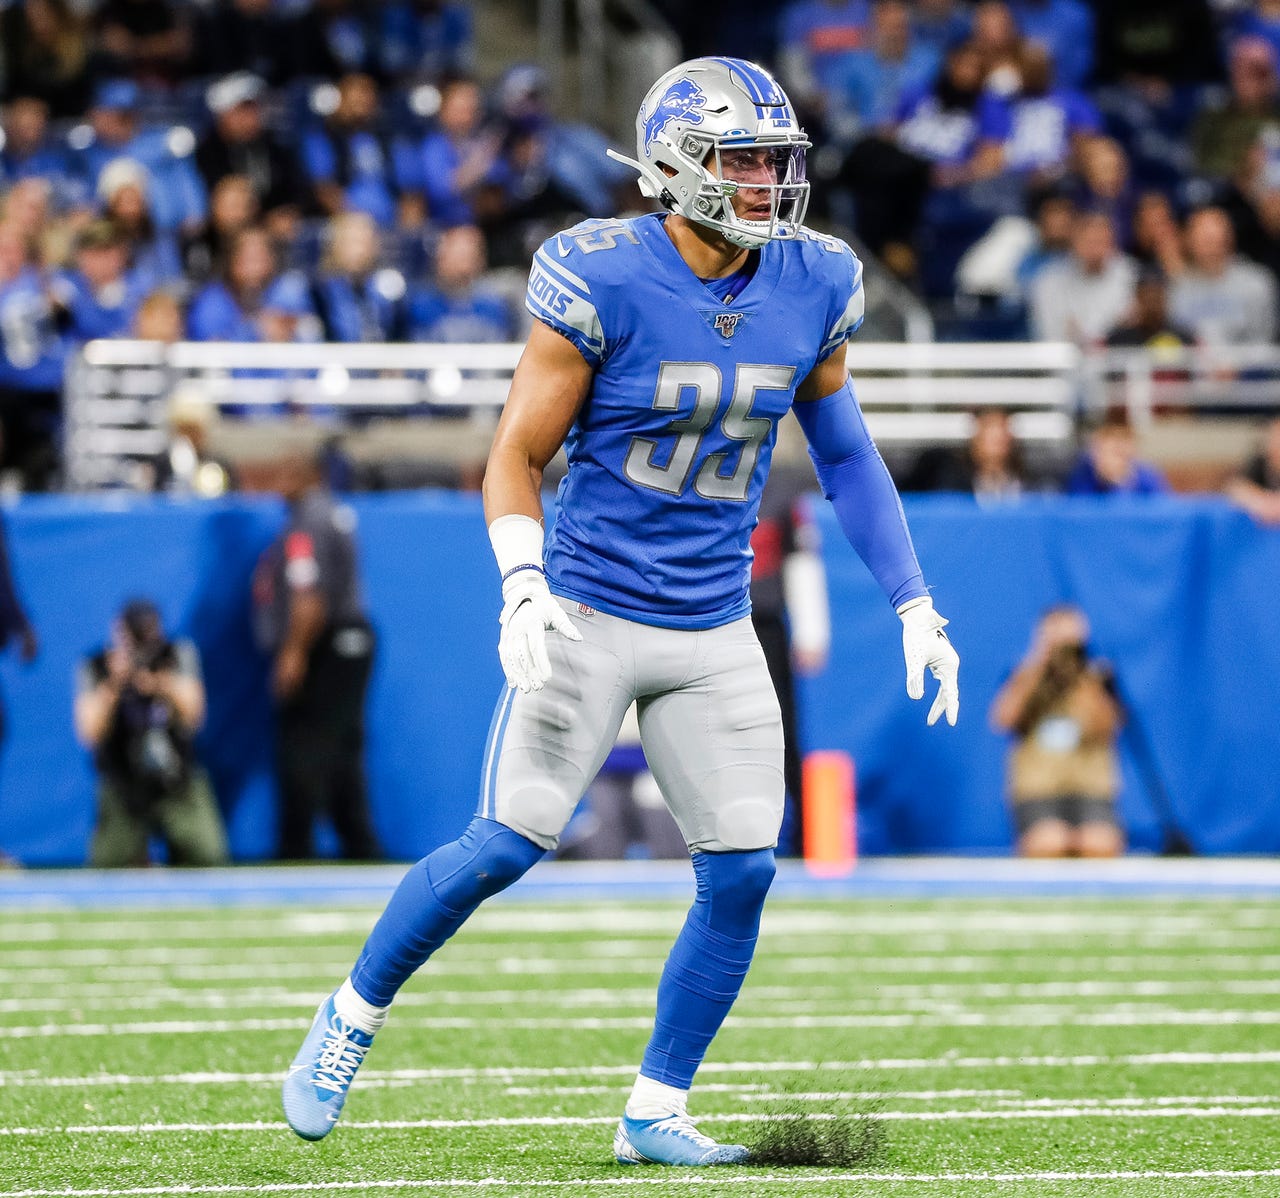 Lions defensive back Miles Killebrew in his position for a play against the Giants during the second half of the Lions' 31-26 win on Sunday, Oct. 27, 2019, at Ford Field.